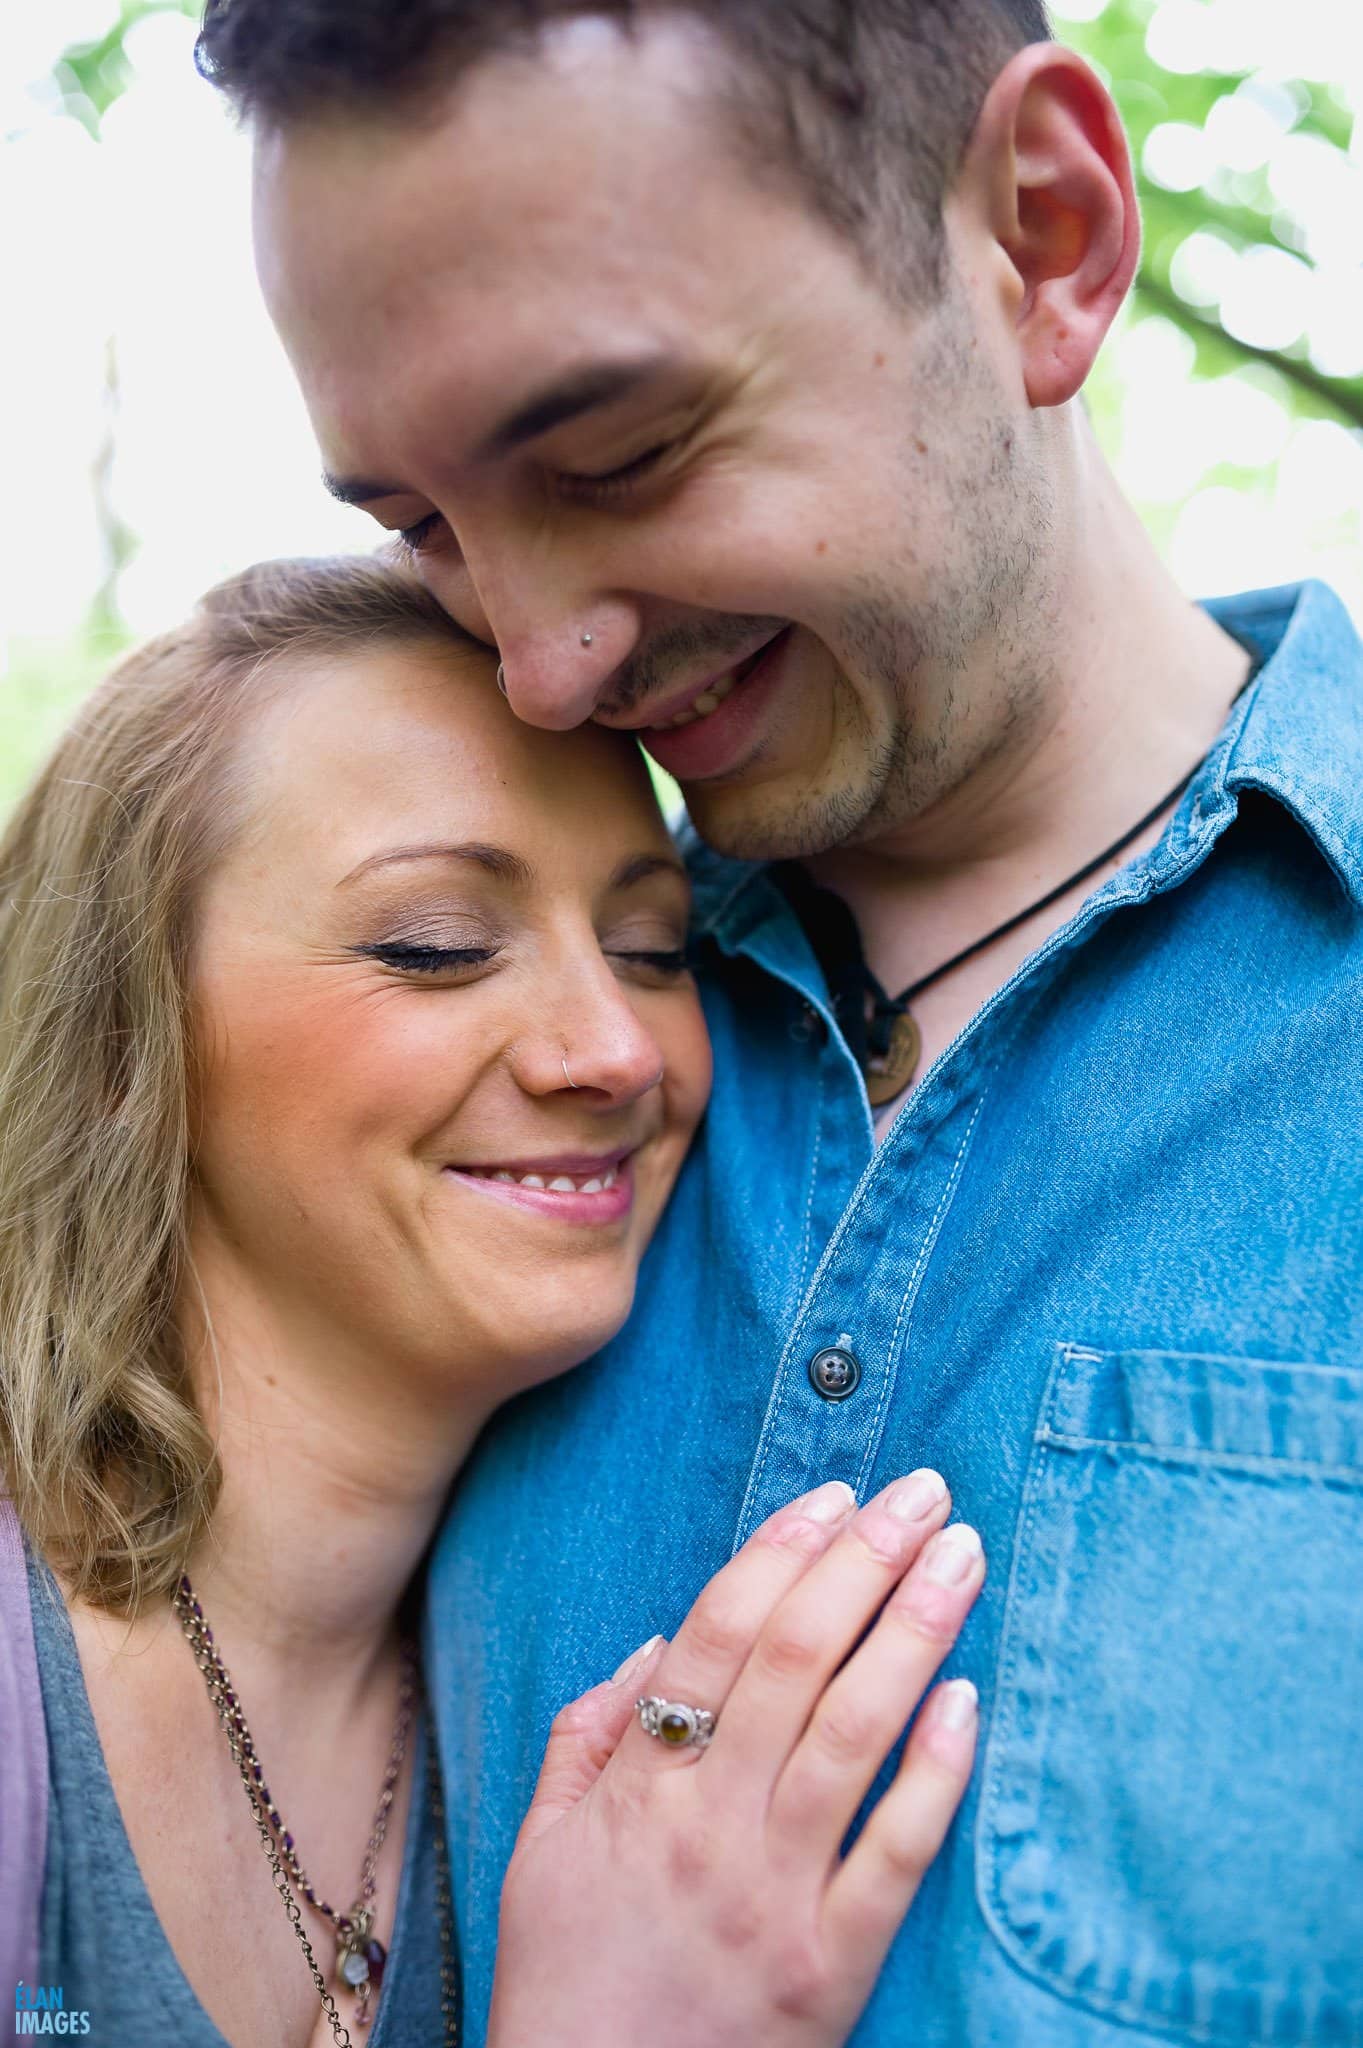 Engagement Photo Shoot in the Bluebell Woods near Bristol 35